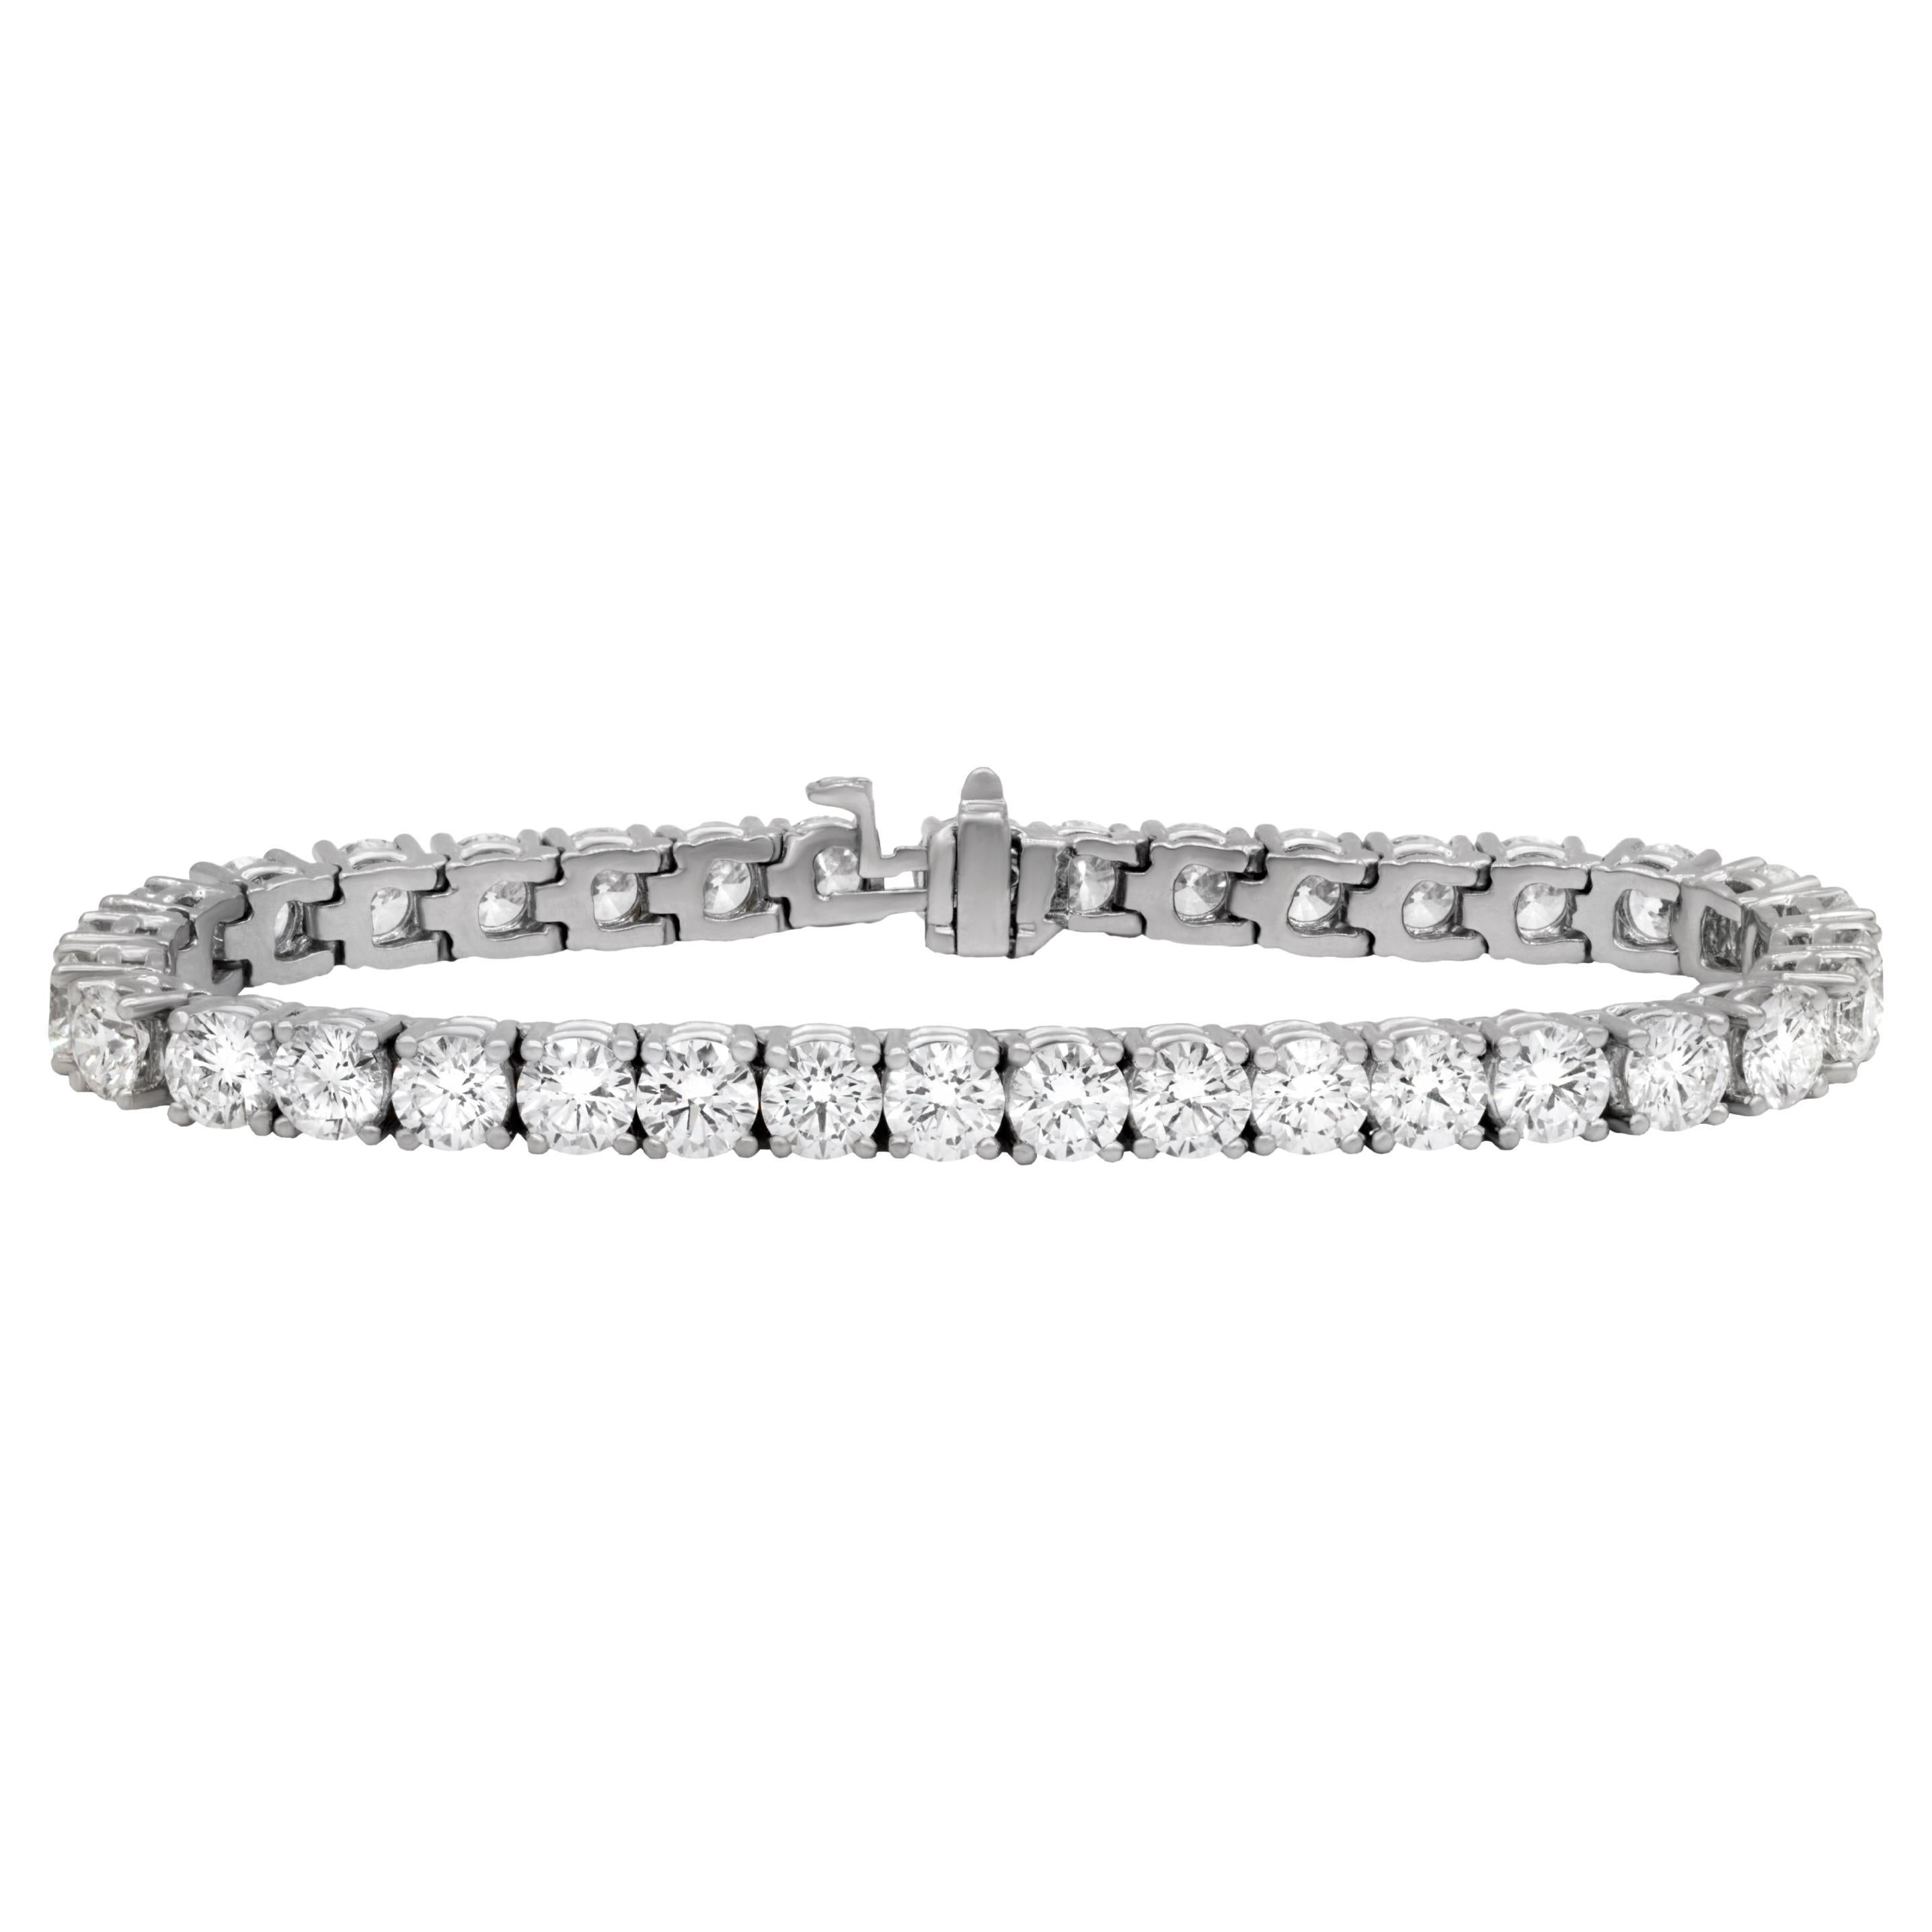 Custom 14-kt white gold diamond tennis bracelet with round cut diamonds weighing 8.00 carats total of 40 stones 0.20 each GH color SI clarity.  Excellent Cut.